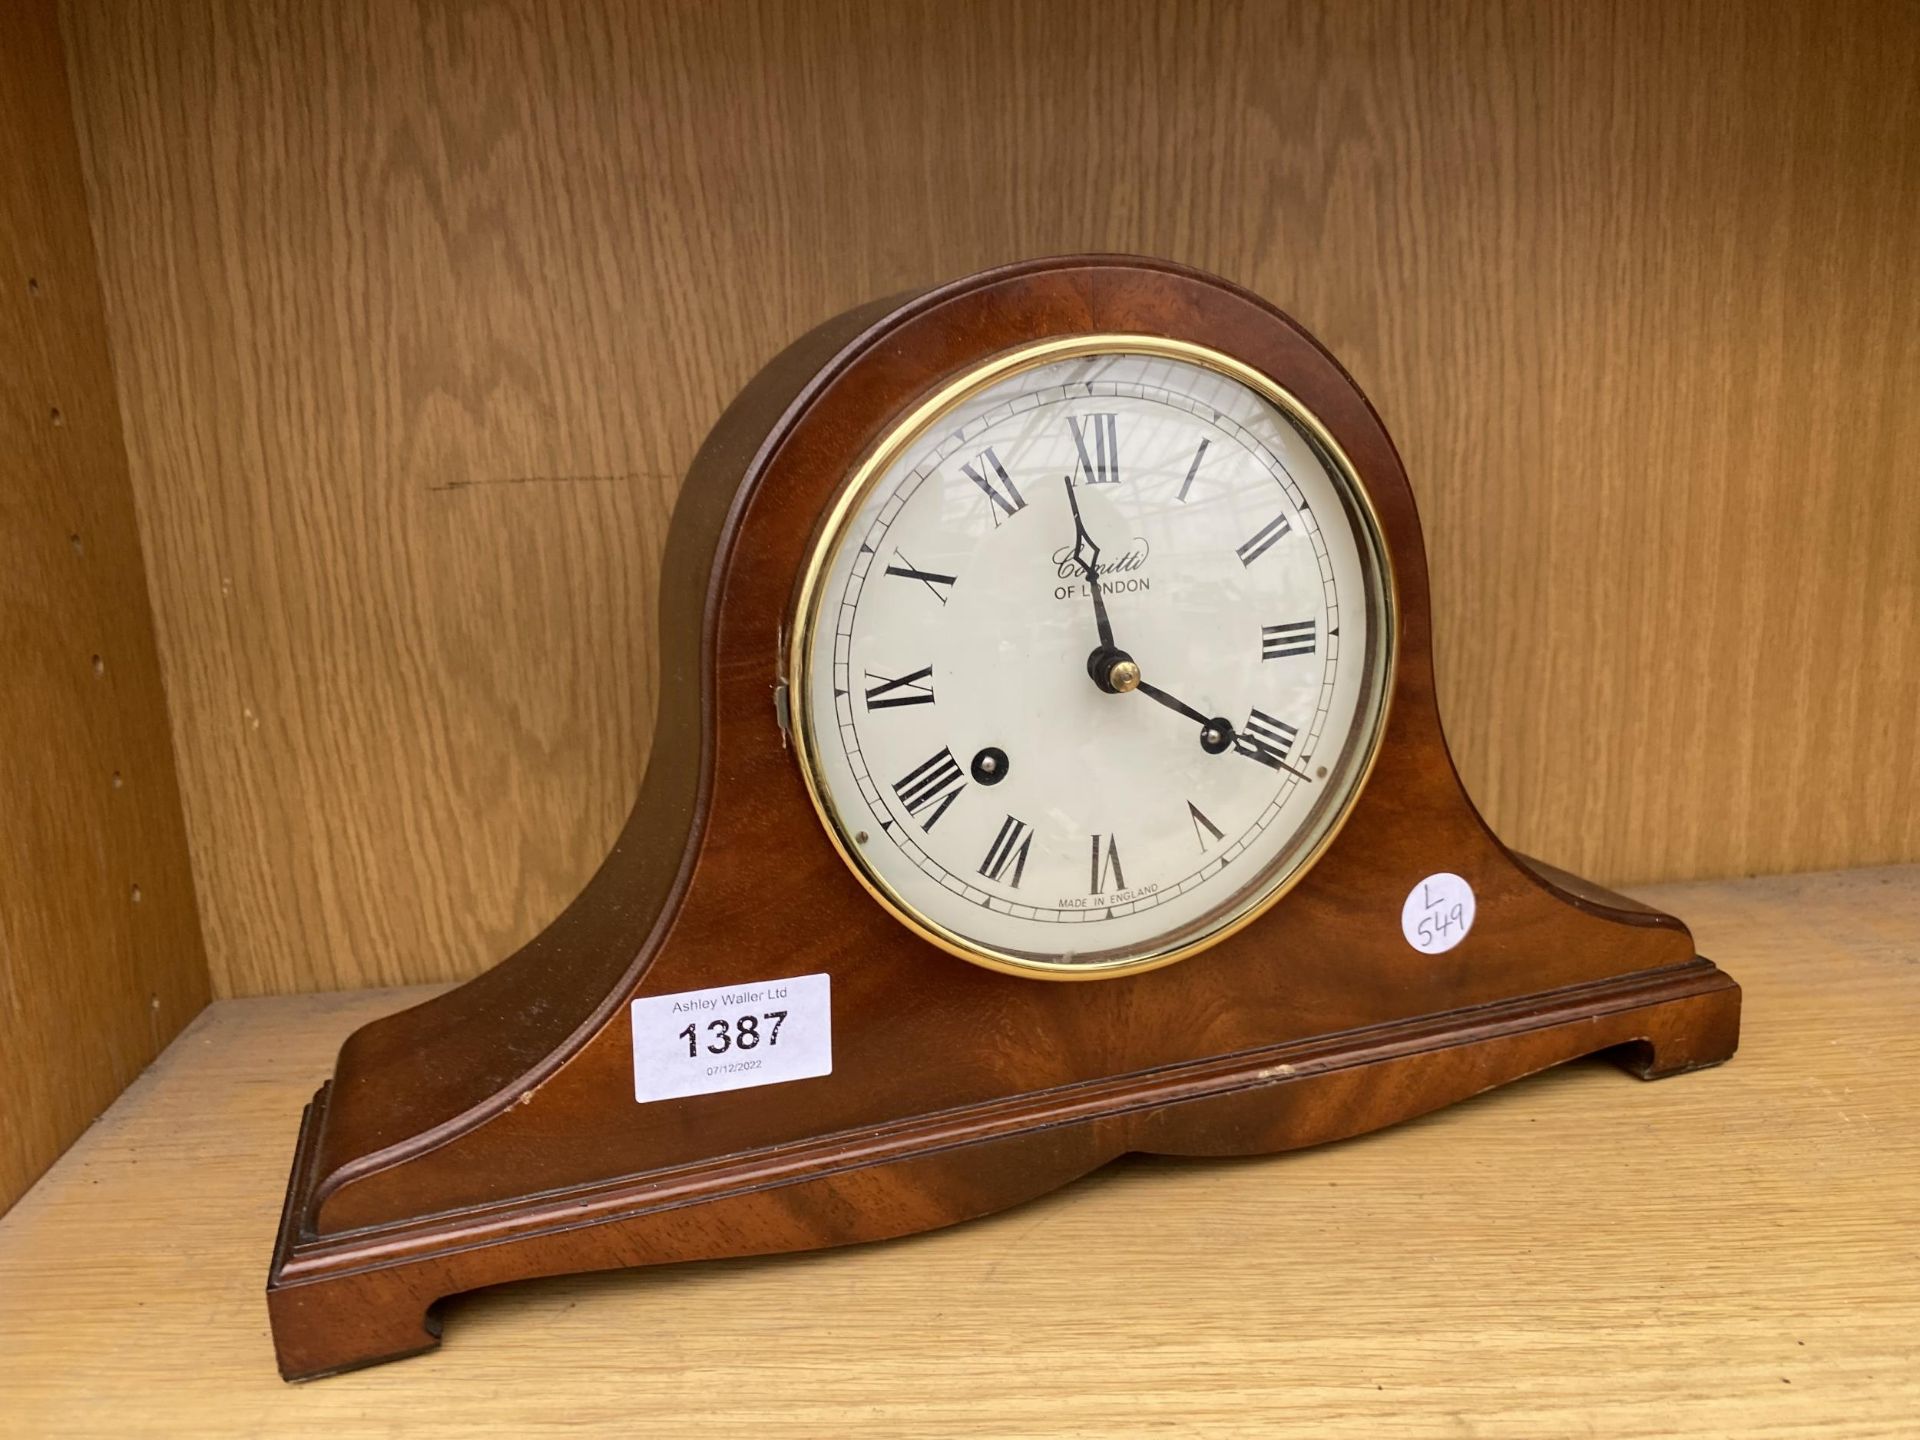 A COMITTI OF LONDON MAHOGANY CASED CHIMING MANTLE CLOCK - BELIEVED IN WORKING ORDER BUT NOT WARRANTY